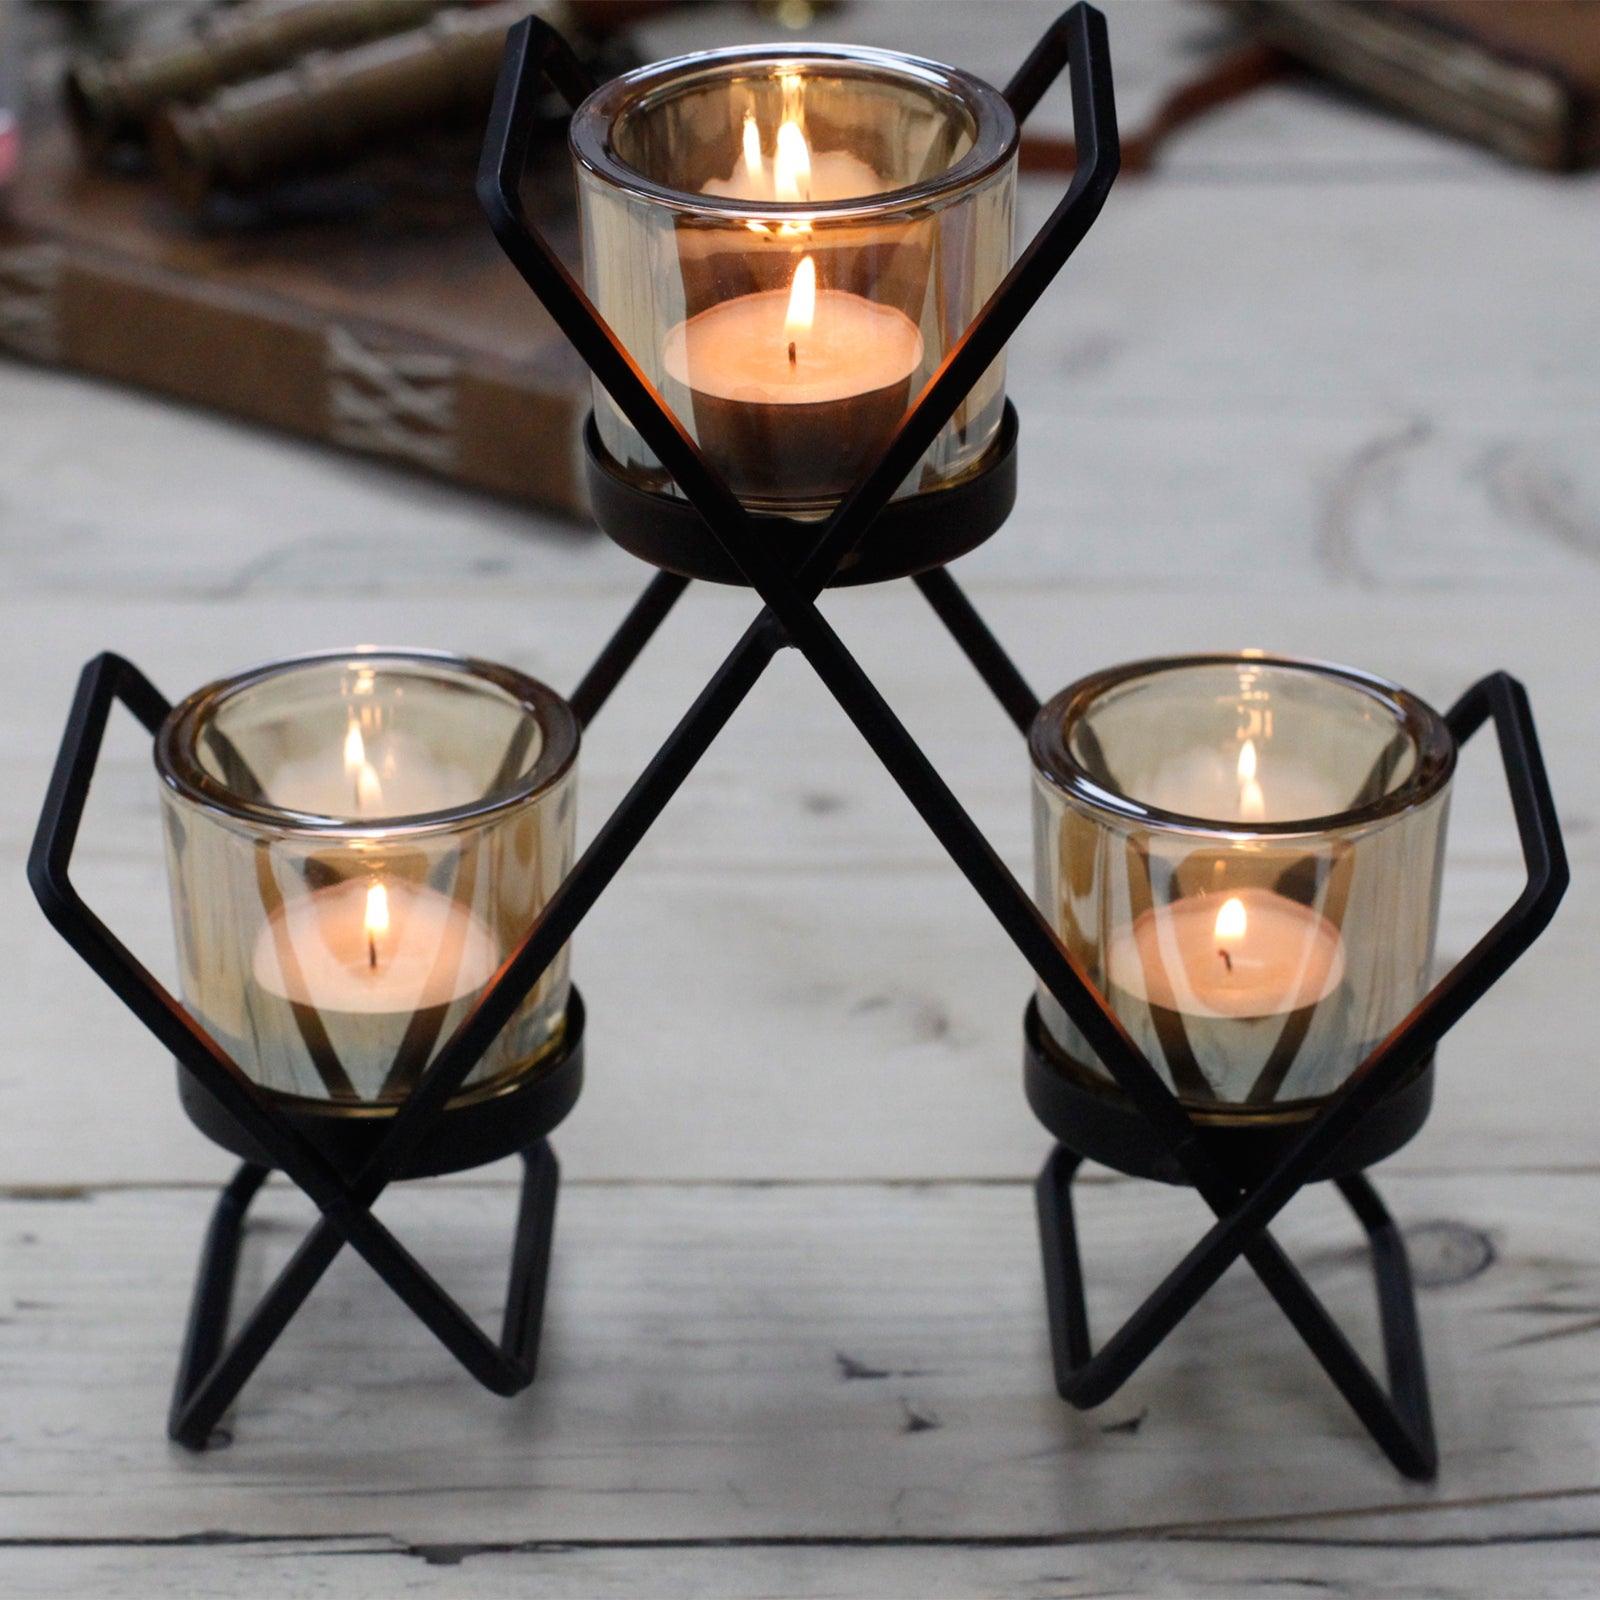 Centrepiece Iron Votive Candle Holder - 3 Cup Triangle - Pegasus Group UK